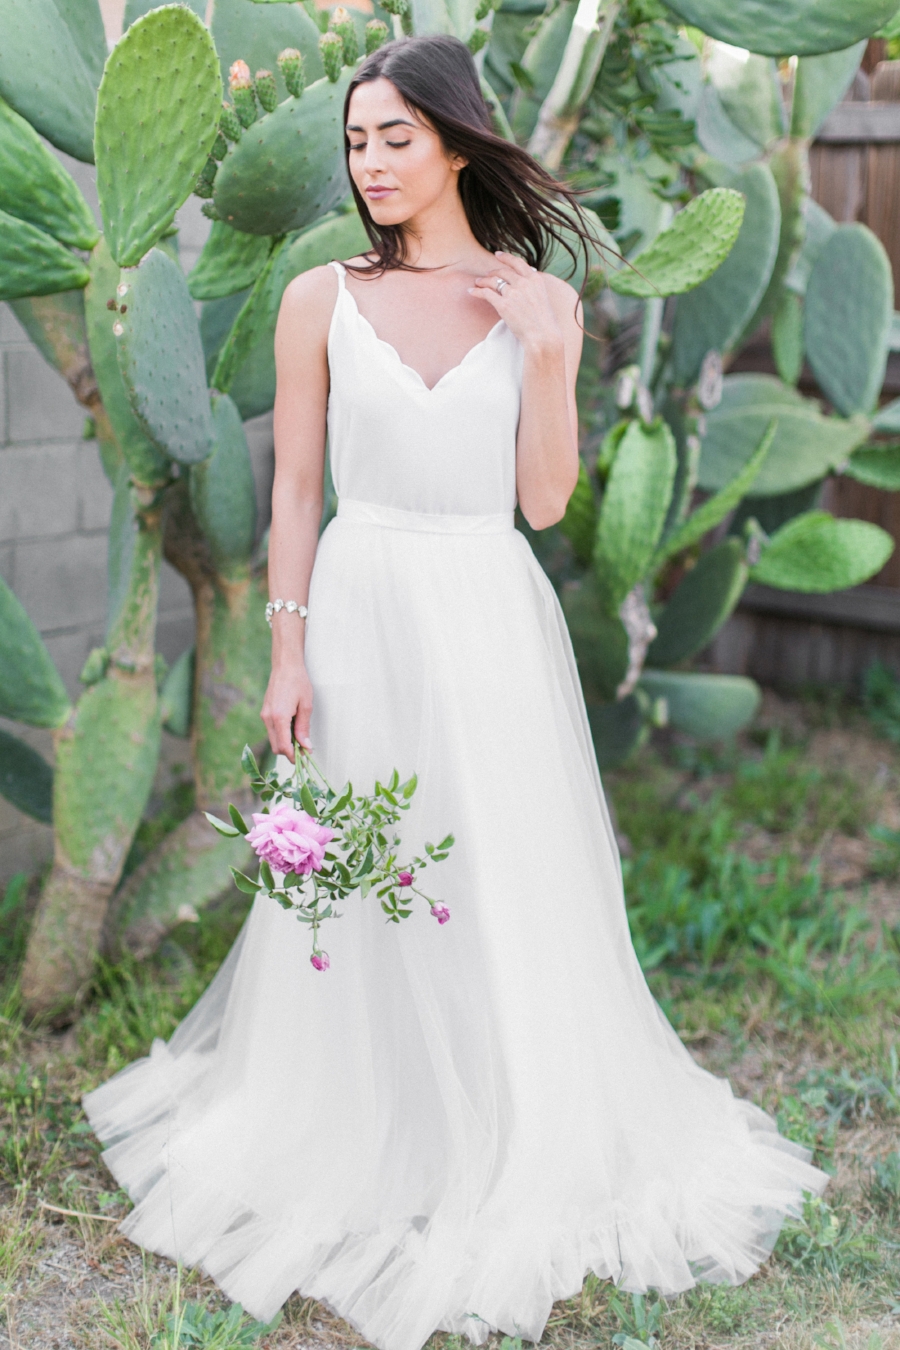 The Best Bridesmaid Dresses For Your Budget! — Wedding Savvy Wedding  Consulting, Inc.